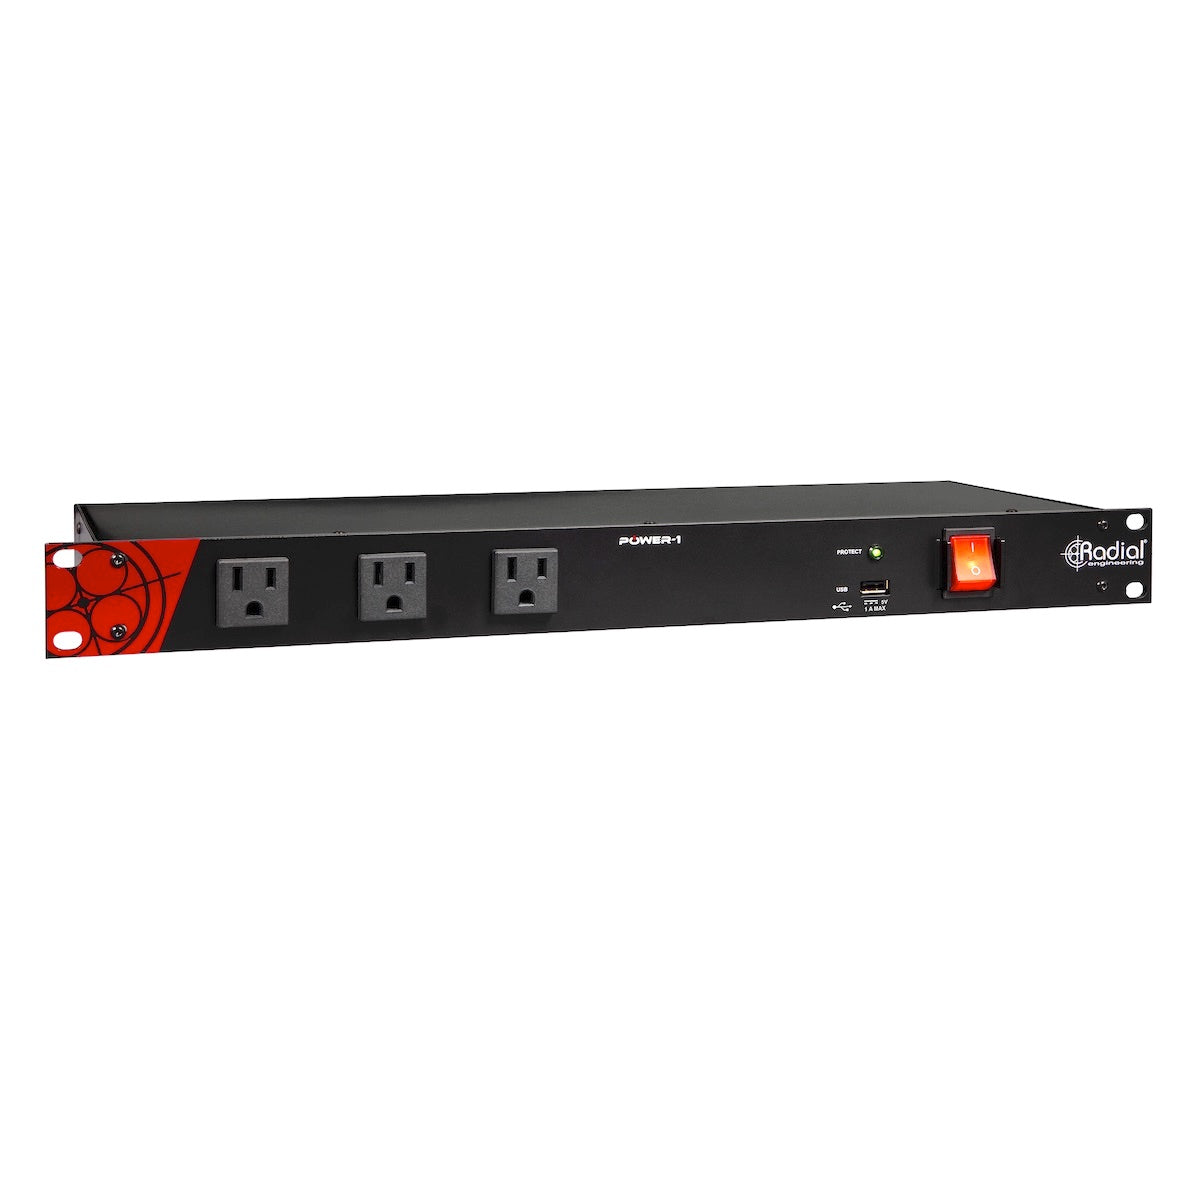 Radial Power-1 Rackmount Power Conditioner Surge Suppressor, left angled view